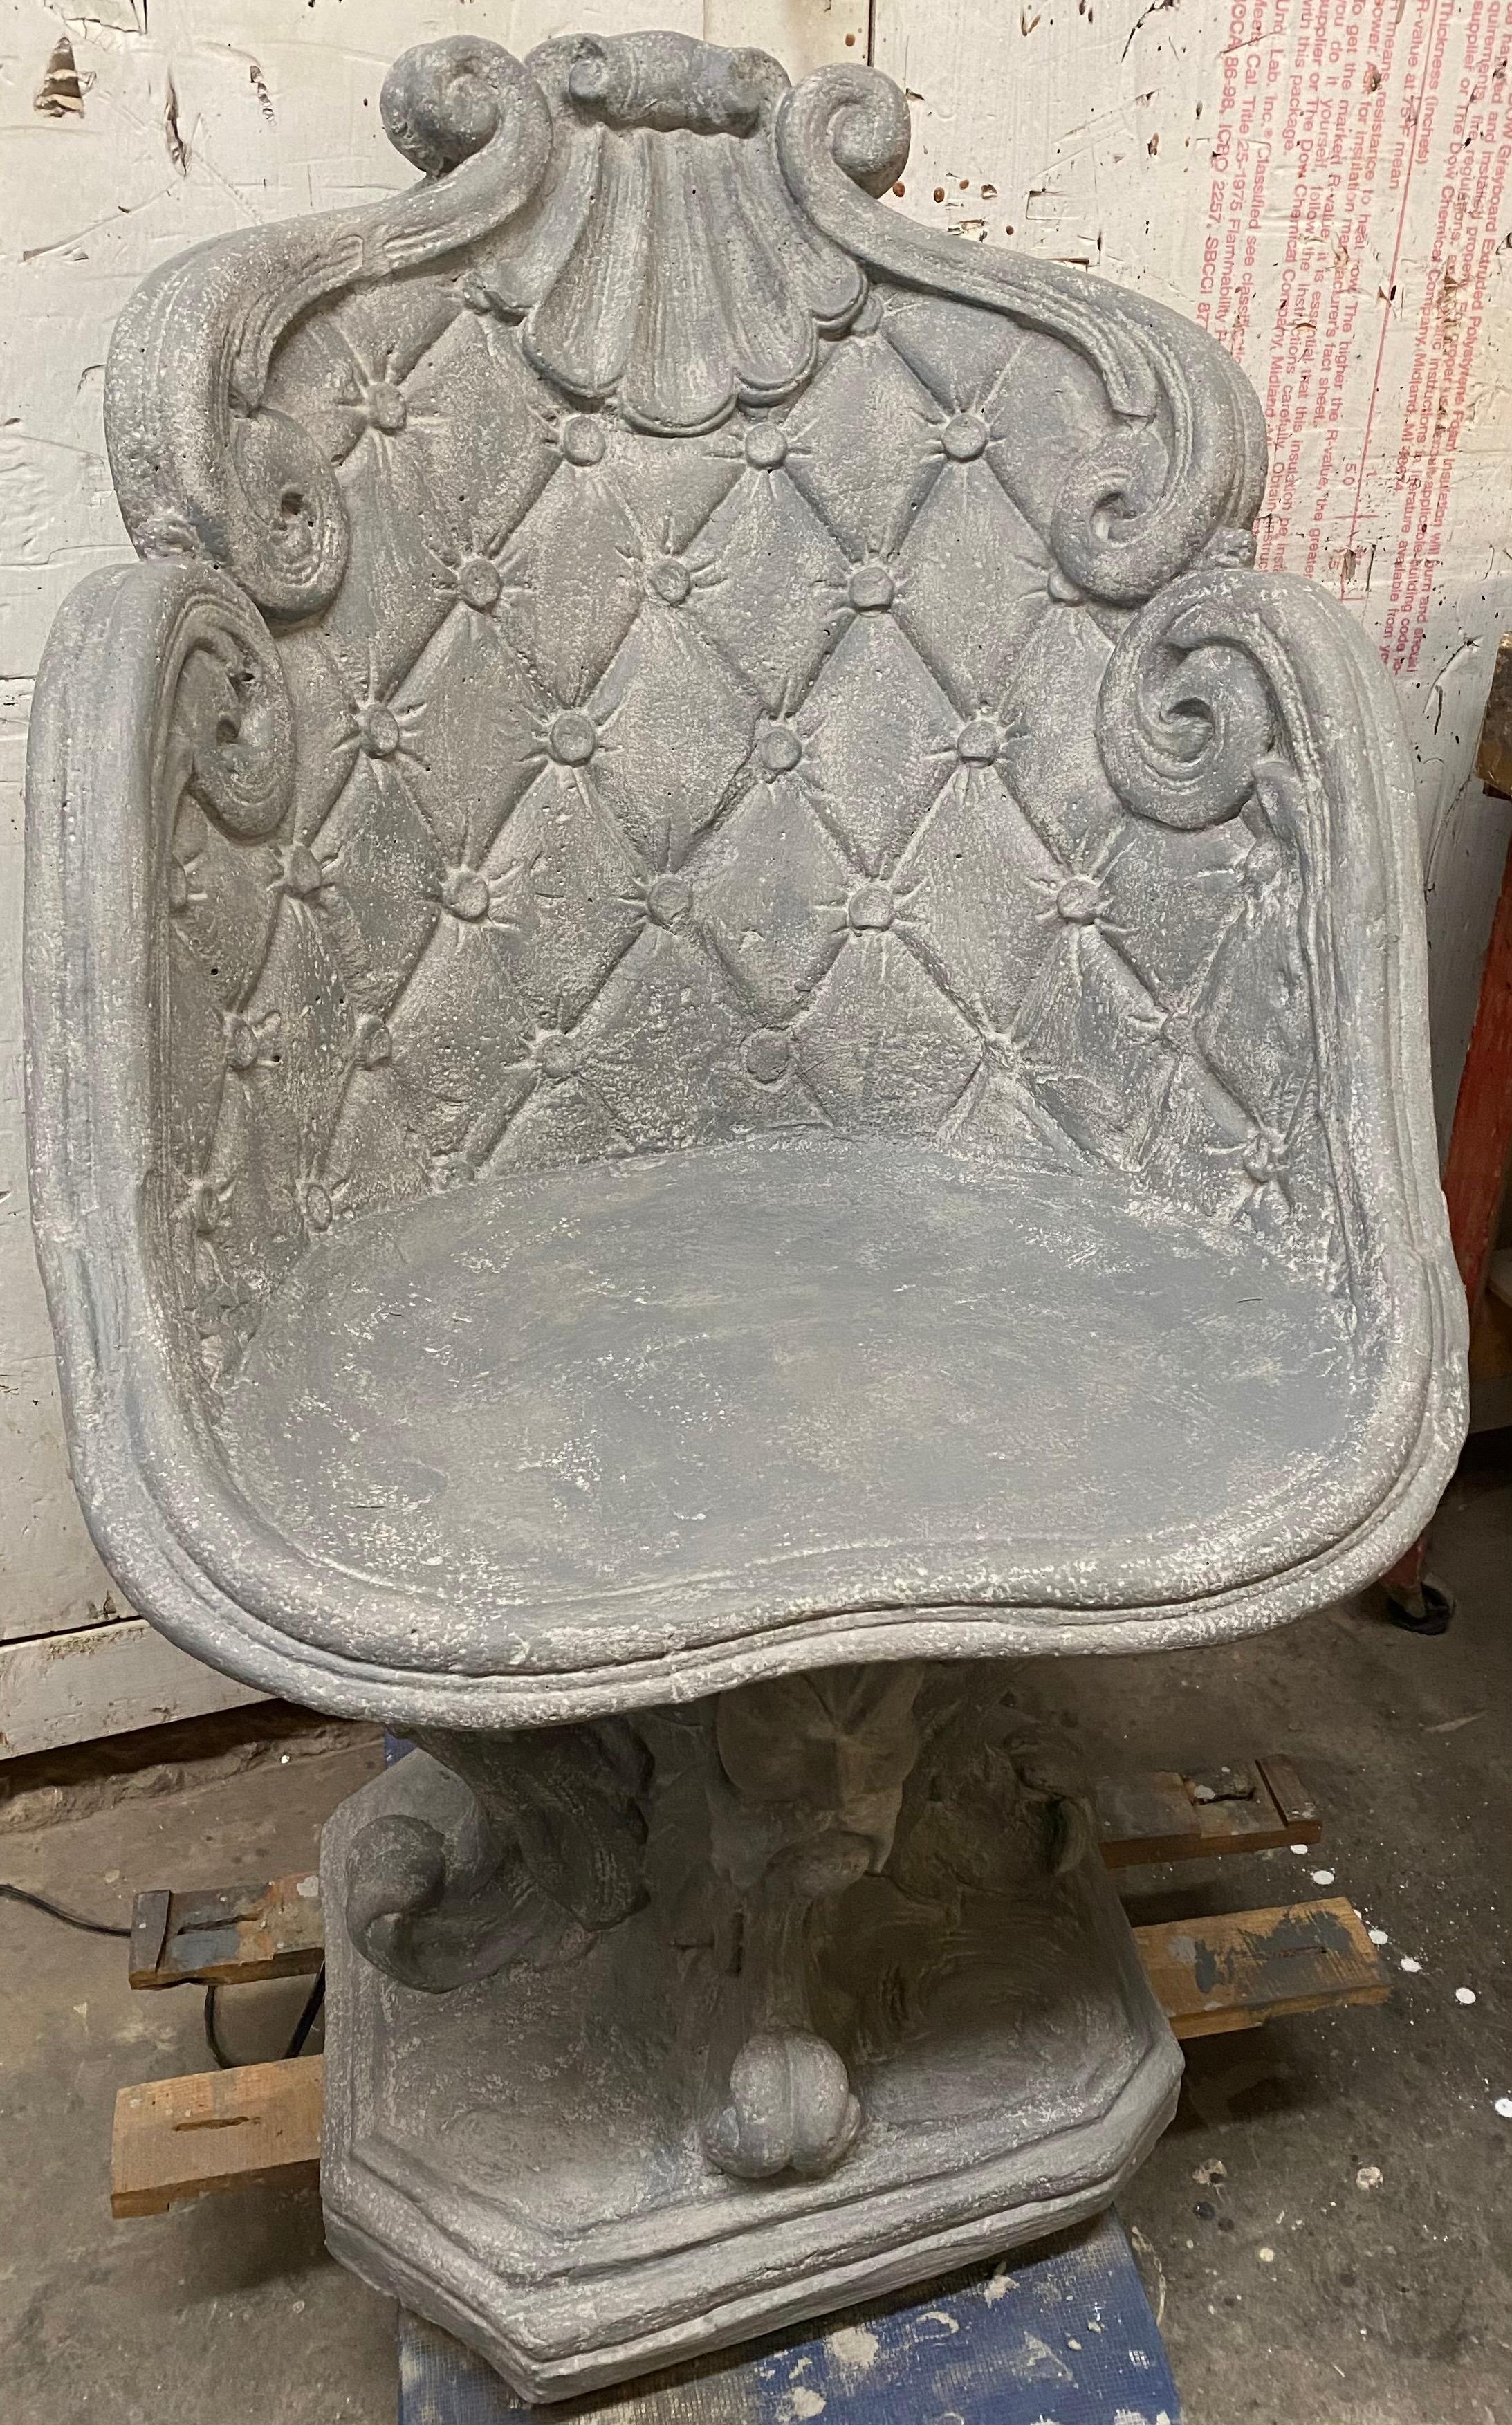 The wonderfully unique garden throne chair is decorated with center shell, diamond quilted design raised on a pedestal of 4 heads of mythological figure of Egyptian god Ammon-Ra depicted with ram horns. Rams were considered a symbol of virility due